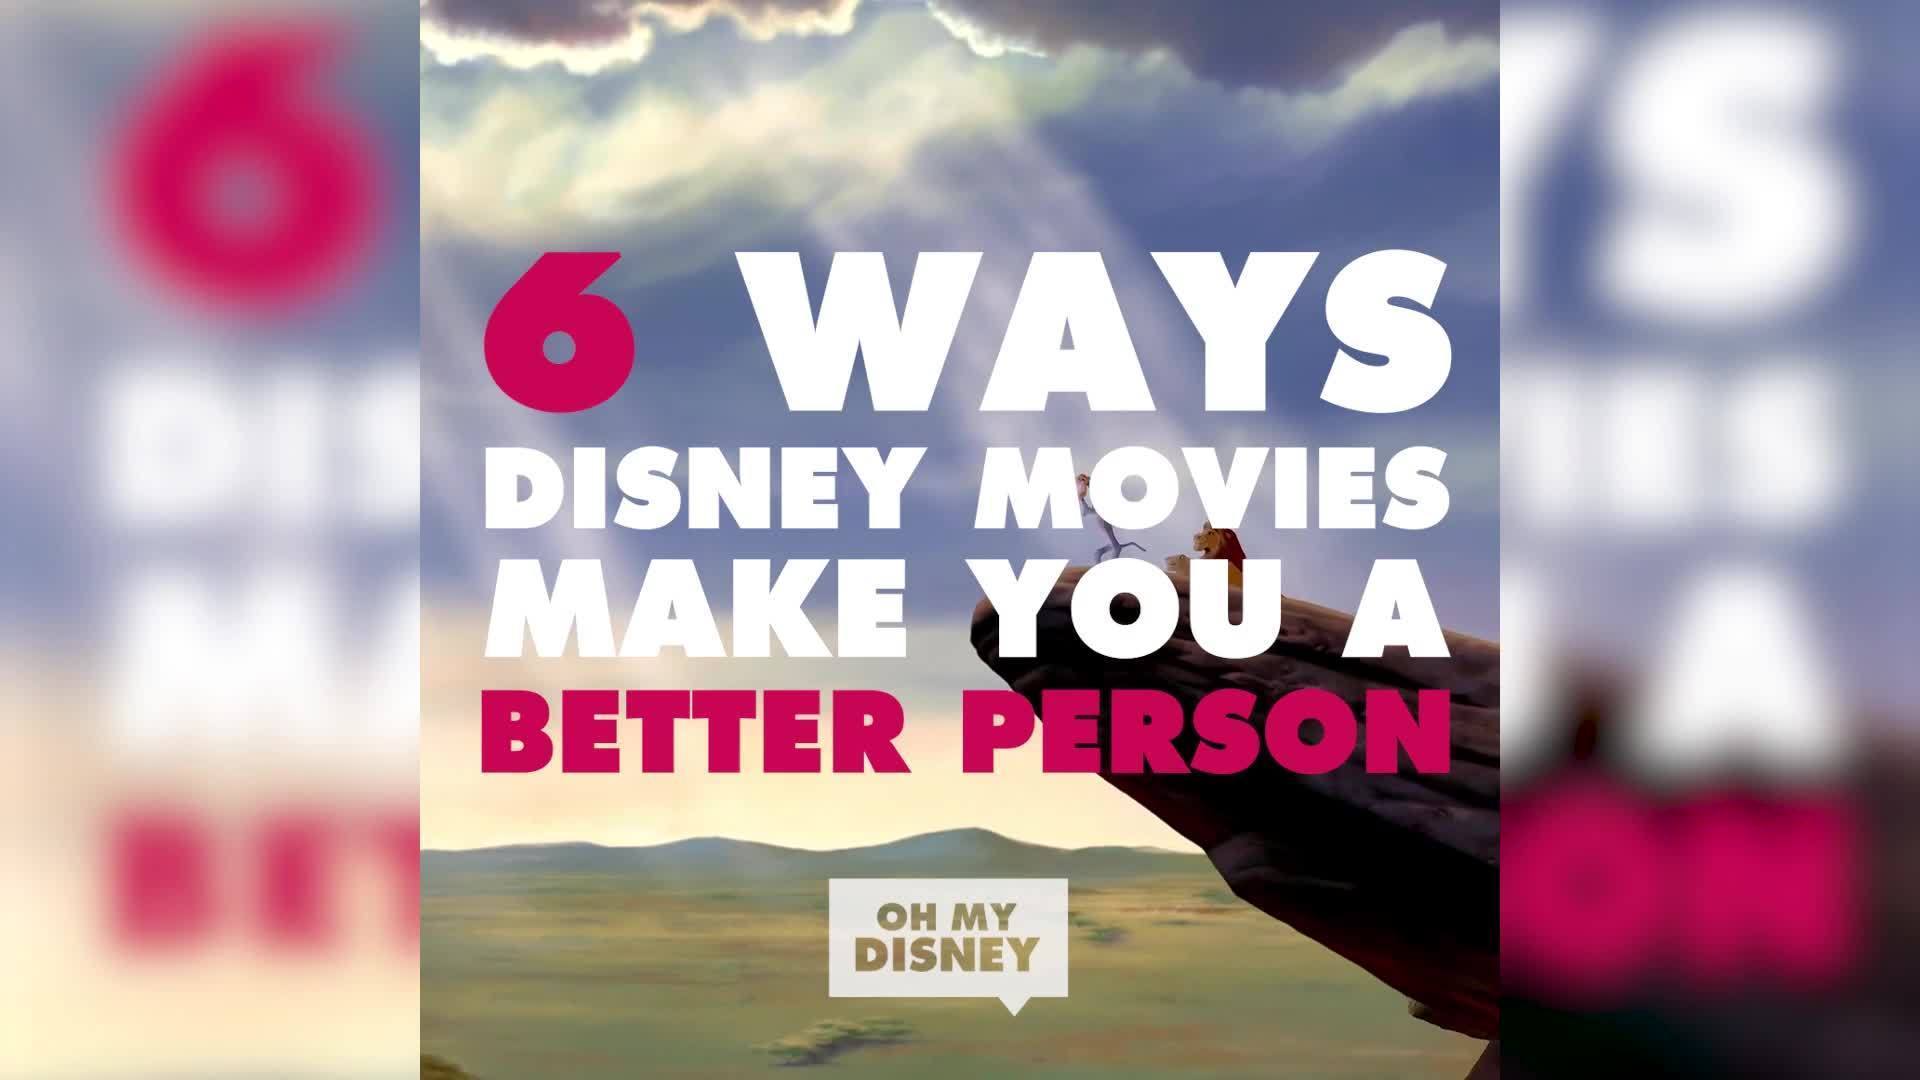 6 Ways Disney Movies Make You a Better Person | ListVids by Oh My Disney